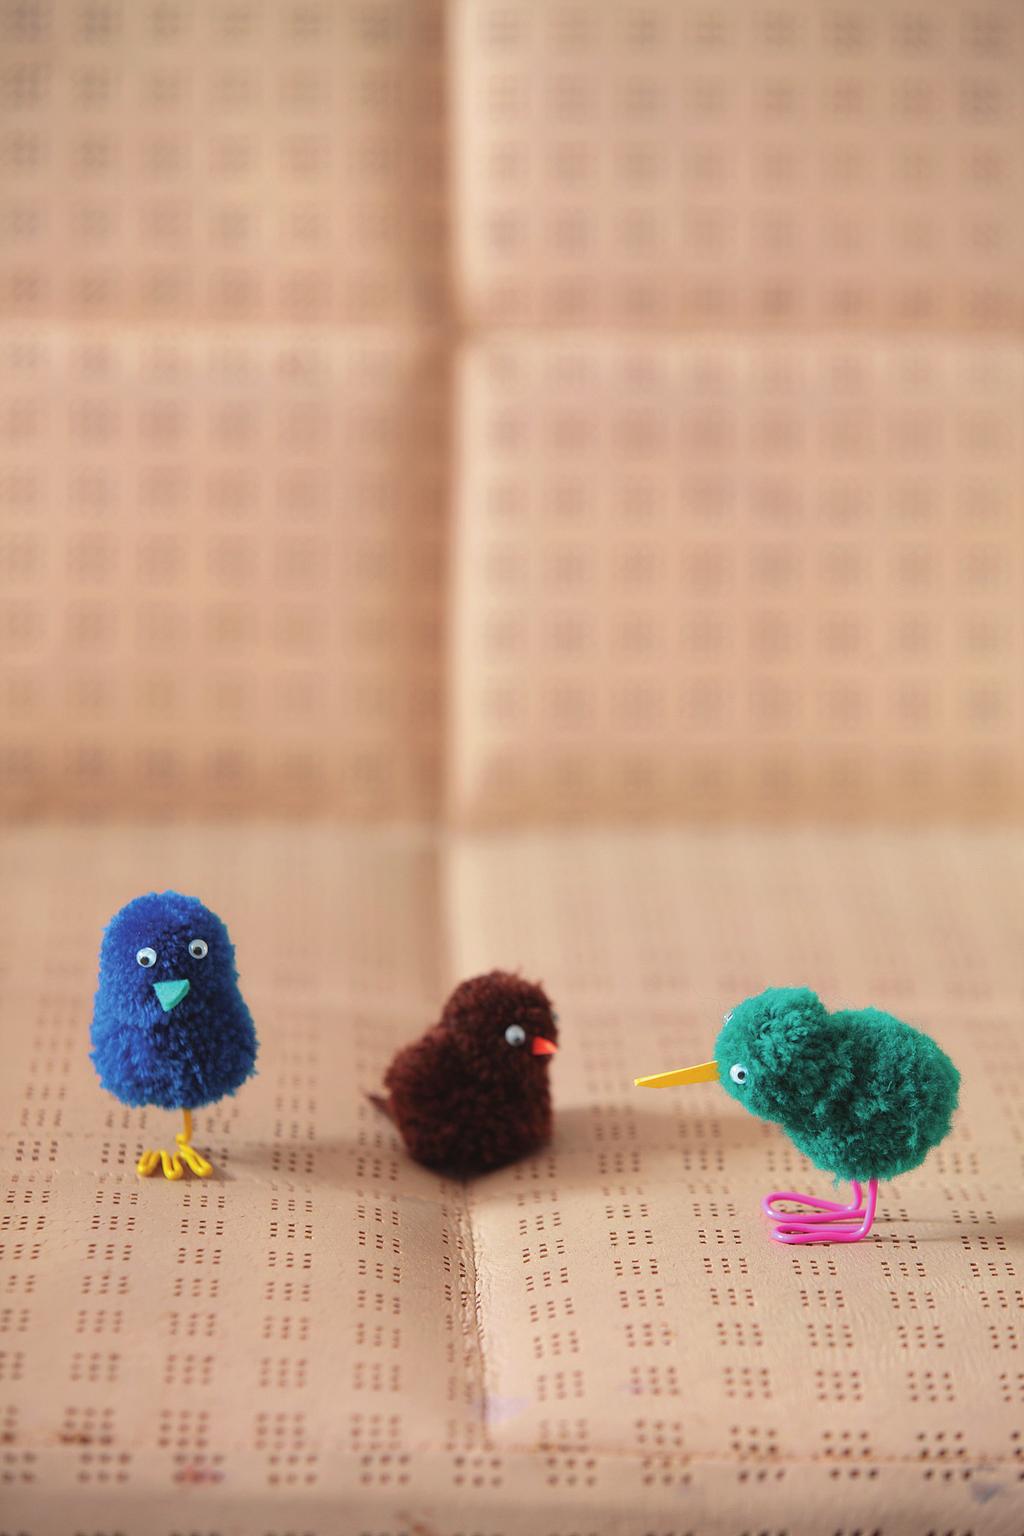 Birds Head Body Make the same two pompoms using the smaller pompom maker, and join them (see joining instructions). Trim the head smaller than the body. Add eyes, beak, and legs as below.